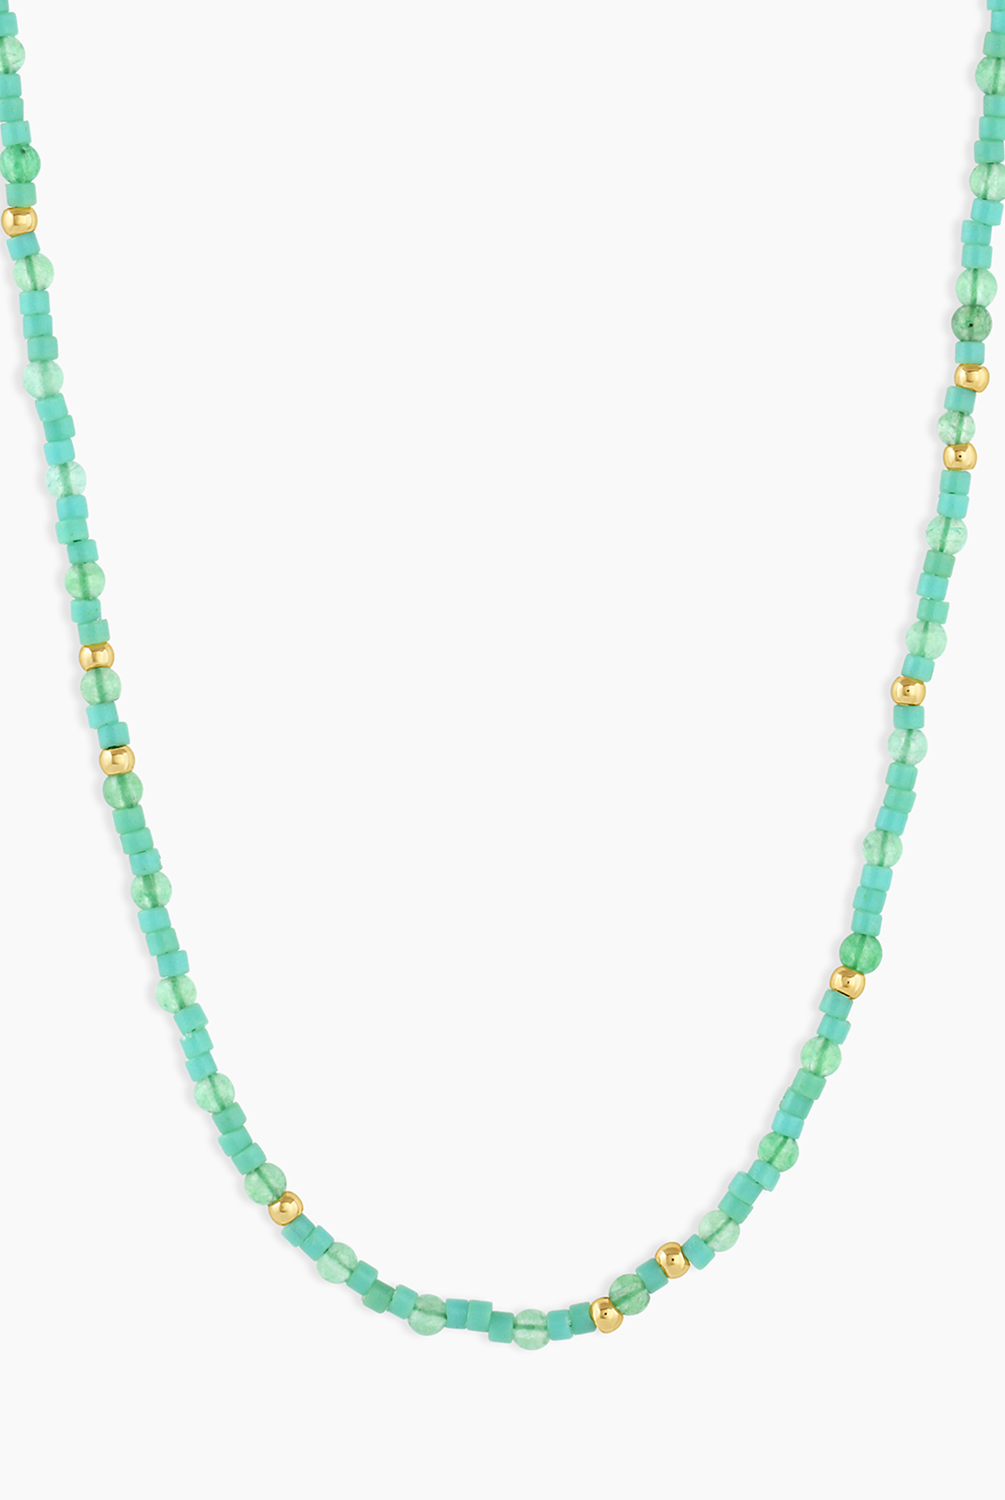 Poppy Gem Necklace-Necklaces-Vixen Collection, Day Spa and Women's Boutique Located in Seattle, Washington